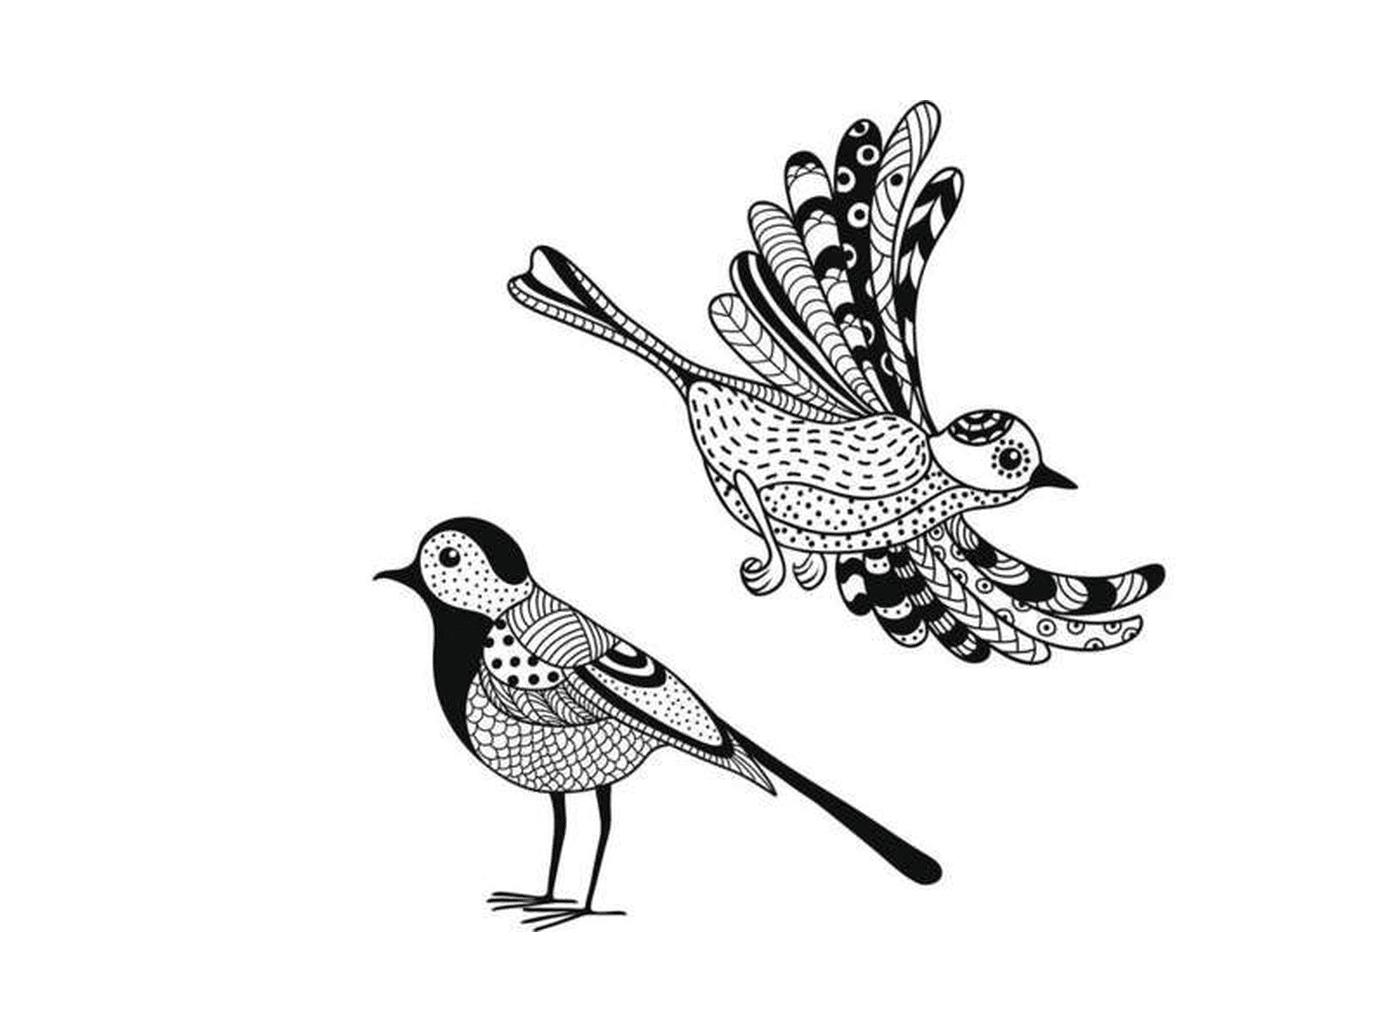  two black and white drawings of a bird 